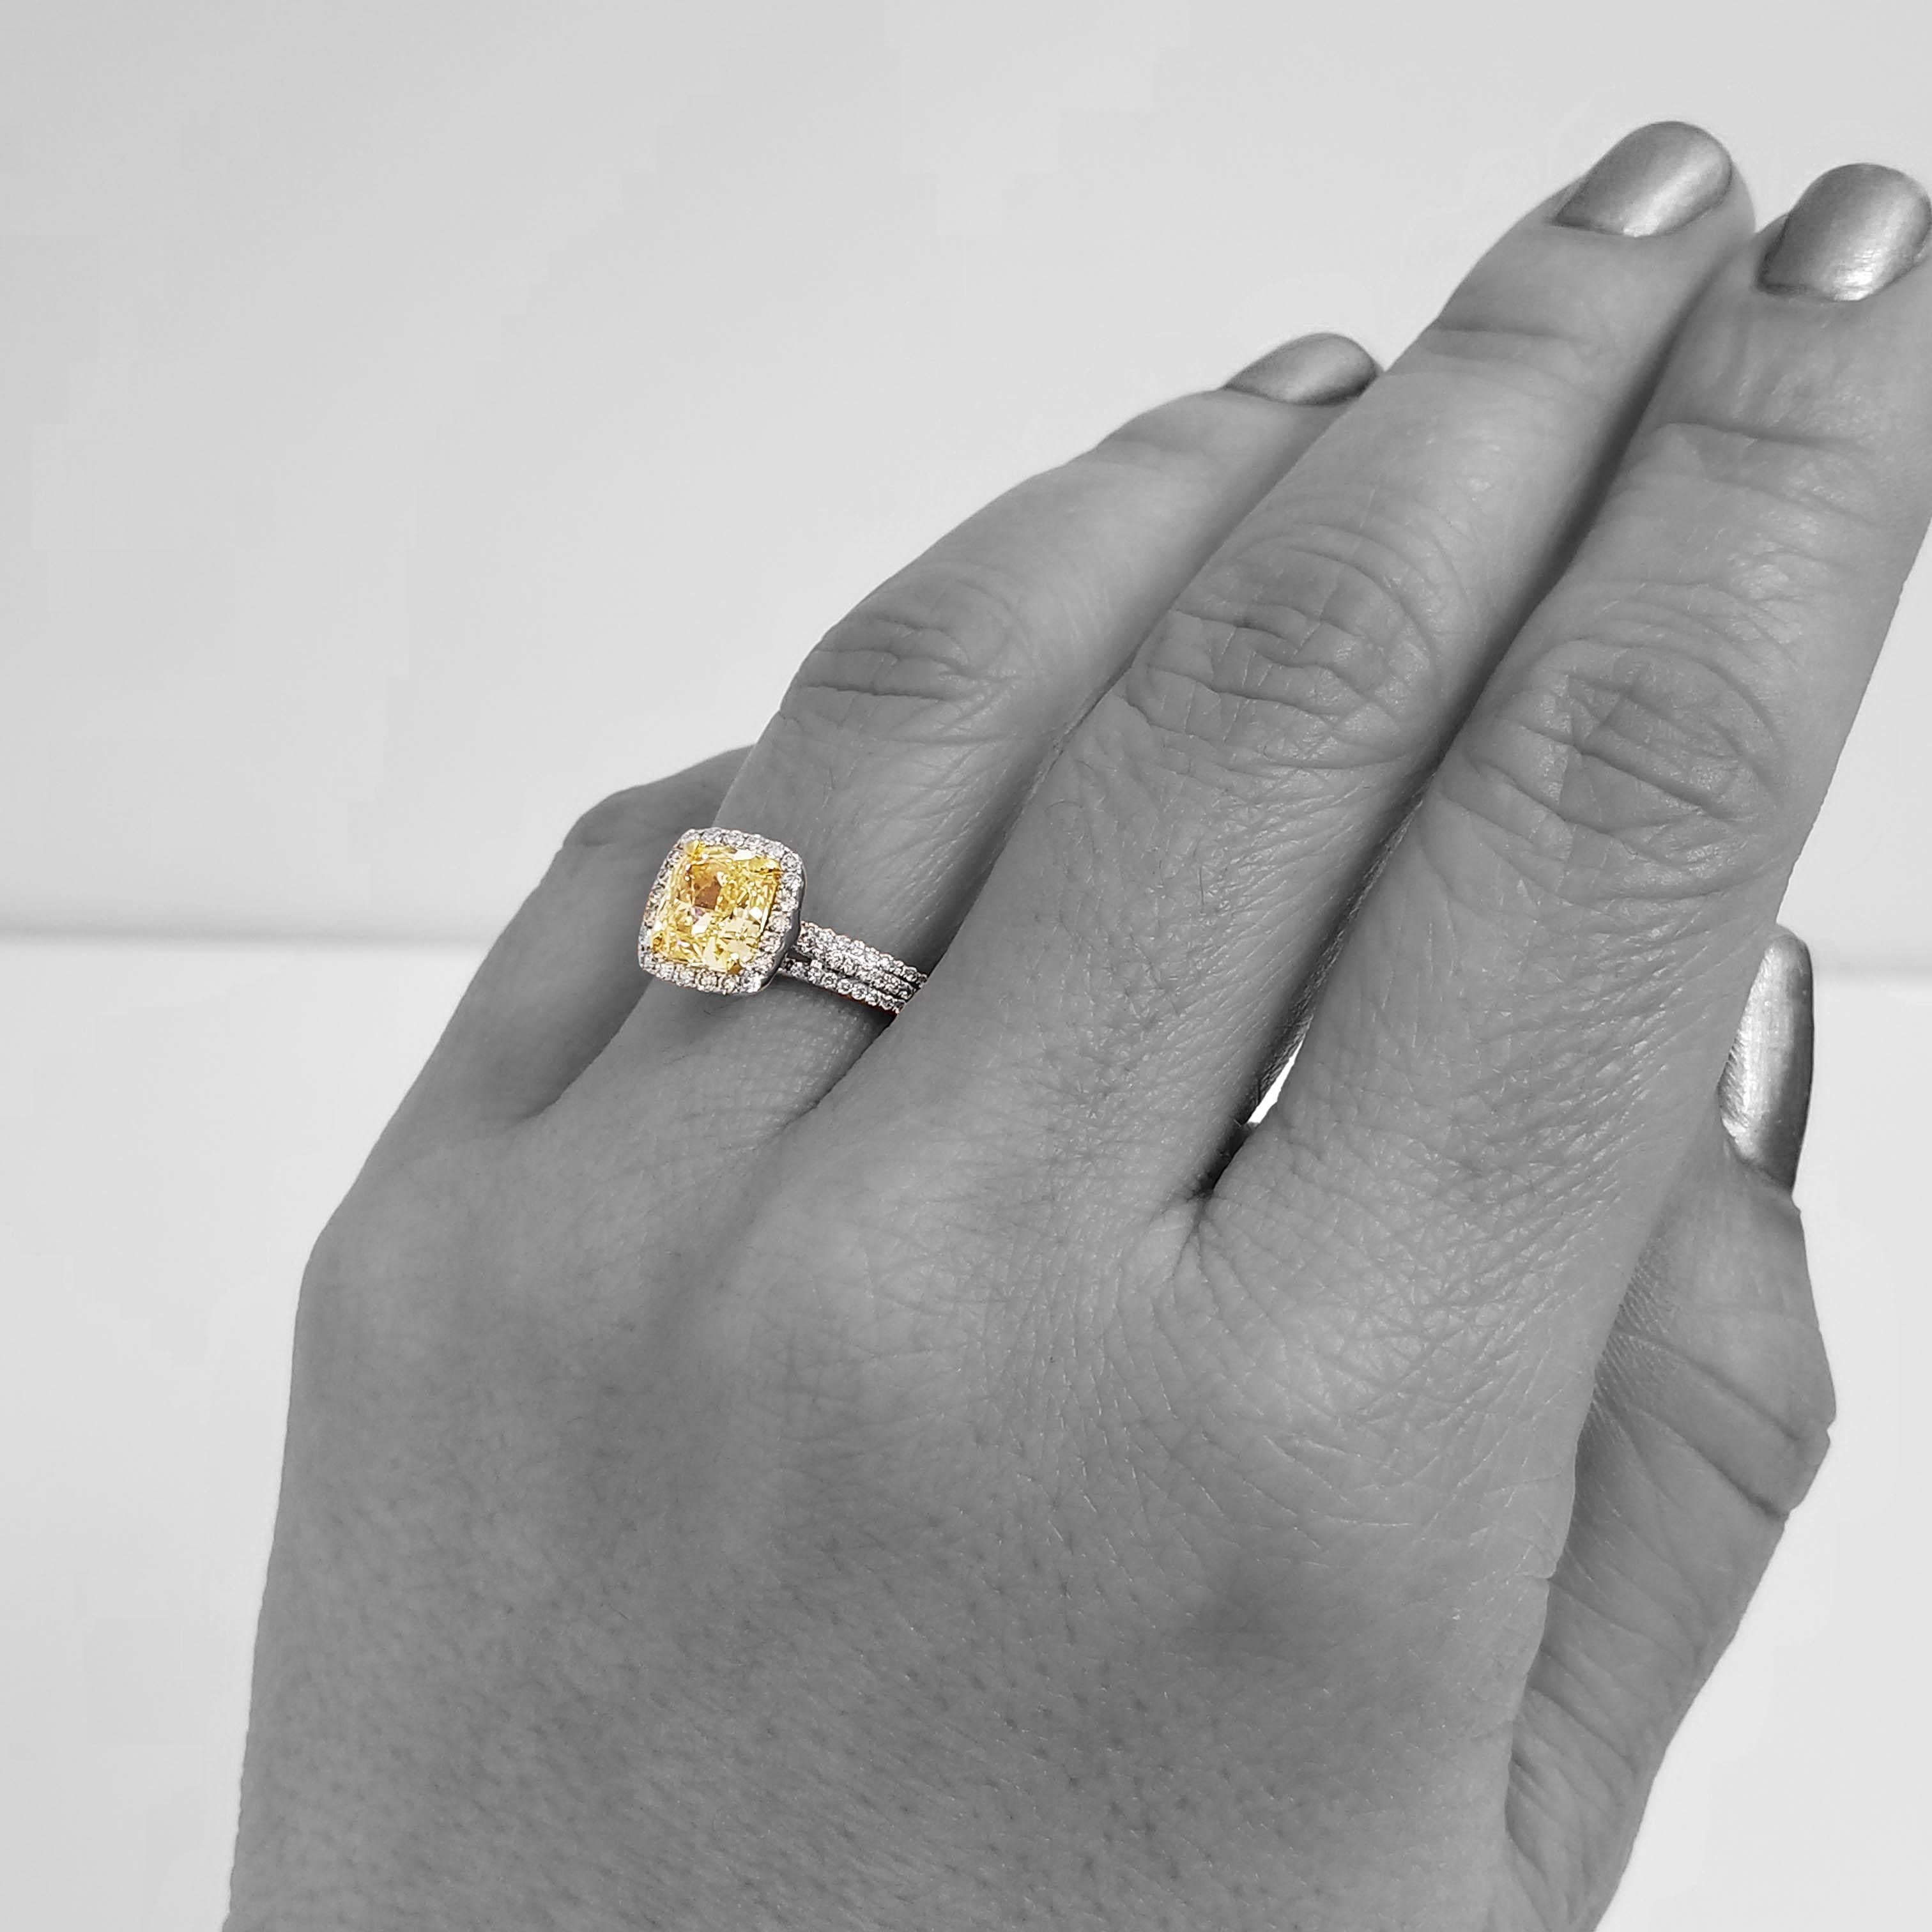 Contemporary Scarselli GIA 2 Cushion Cut Fancy Yellow Diamond Engagement Ring in 18 Karat